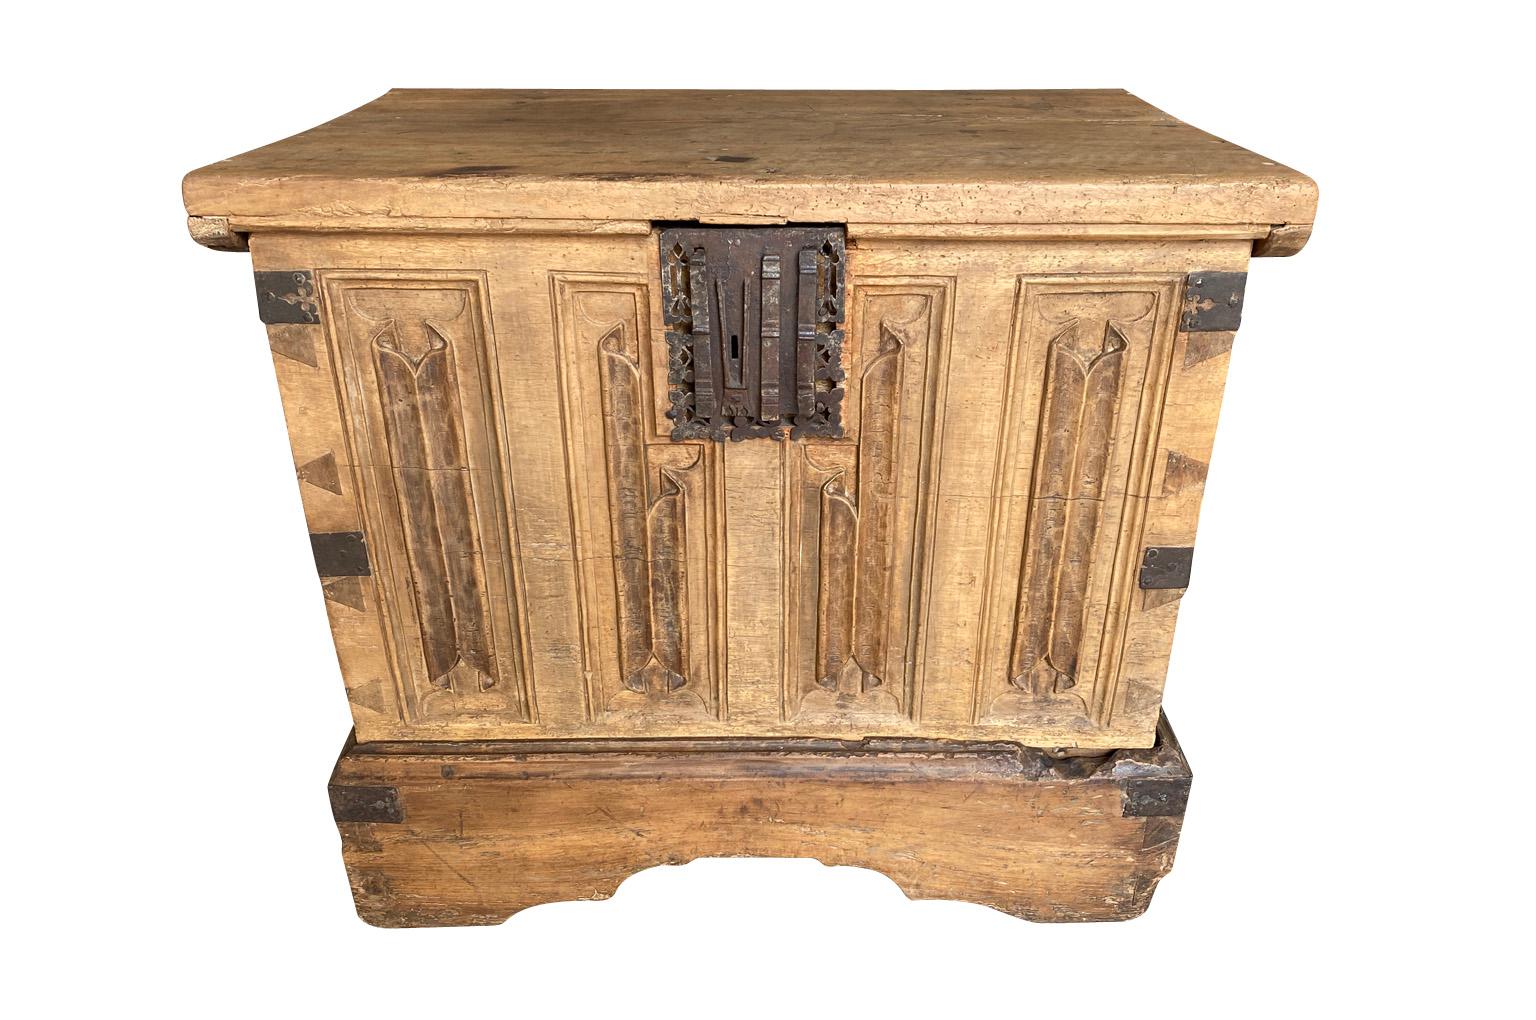 A stunning early 16th century Coffre - Trunk from the Bourgogne region of France. Beautifully constructed from very handsome walnut with lovely linen fold detailing, a beautiful lock plate and iron side handles. The coffre rests on its walnut stand